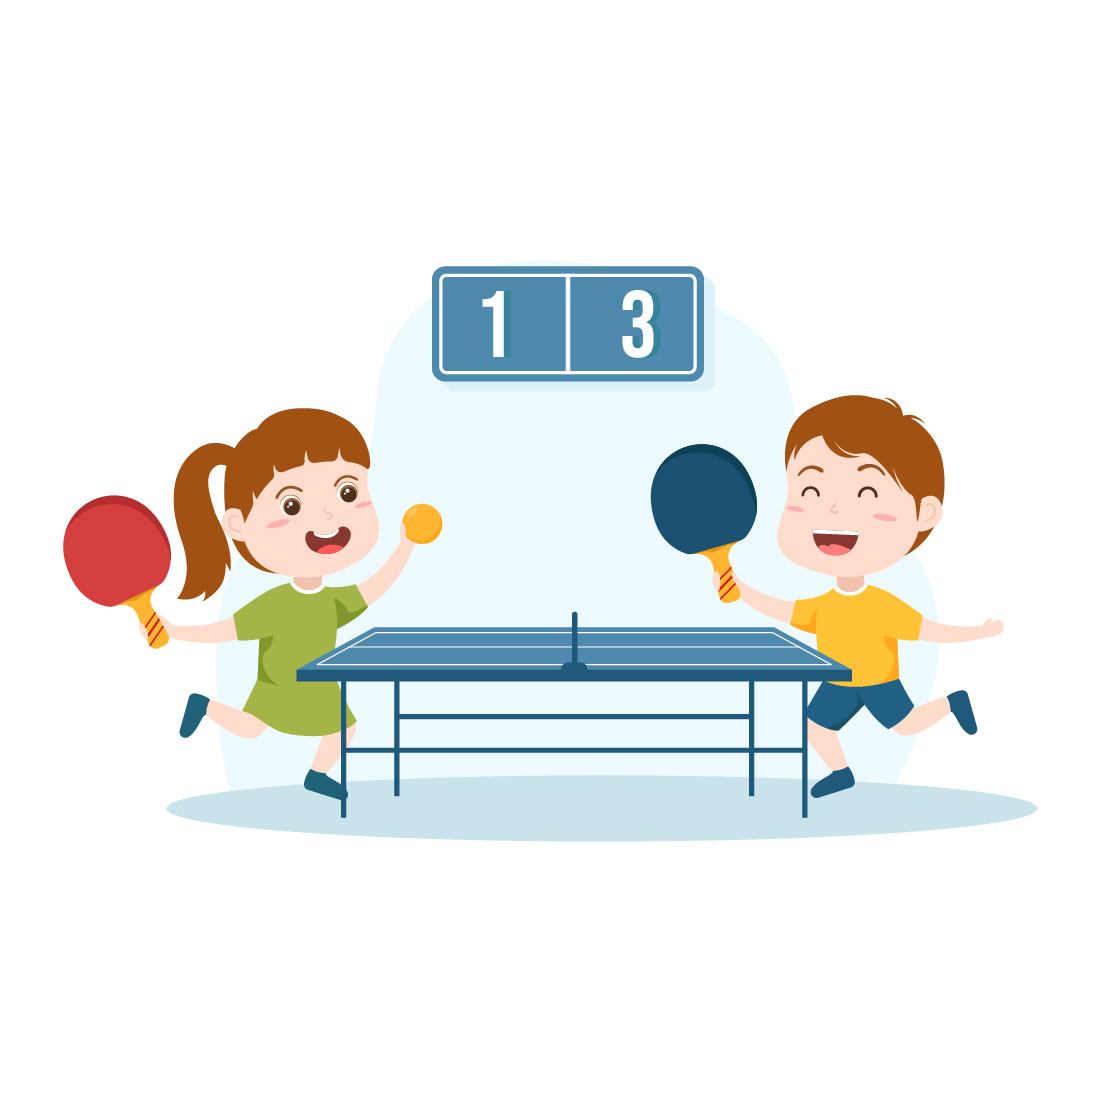 Unique cartoon image of children playing table tennis.